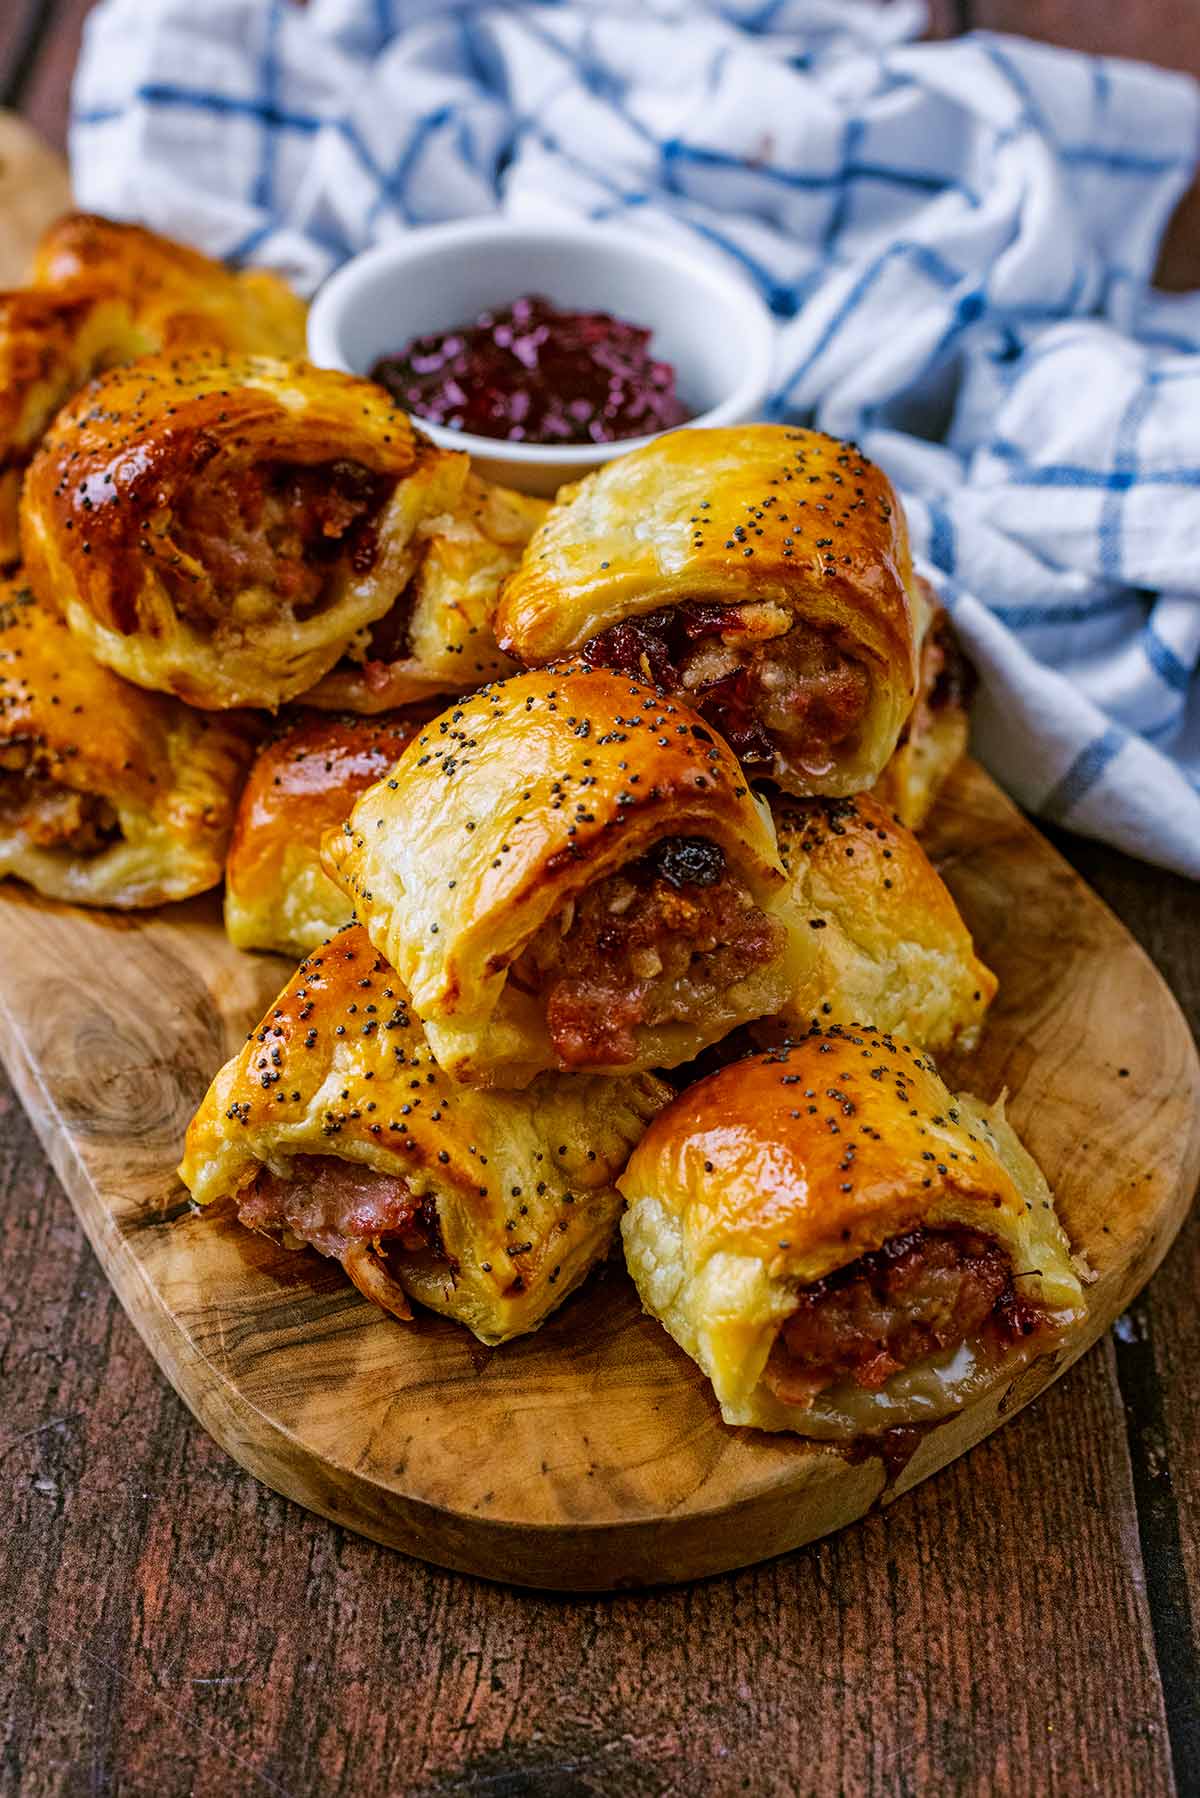 A pile of sausage rolls on a wooden serving board.